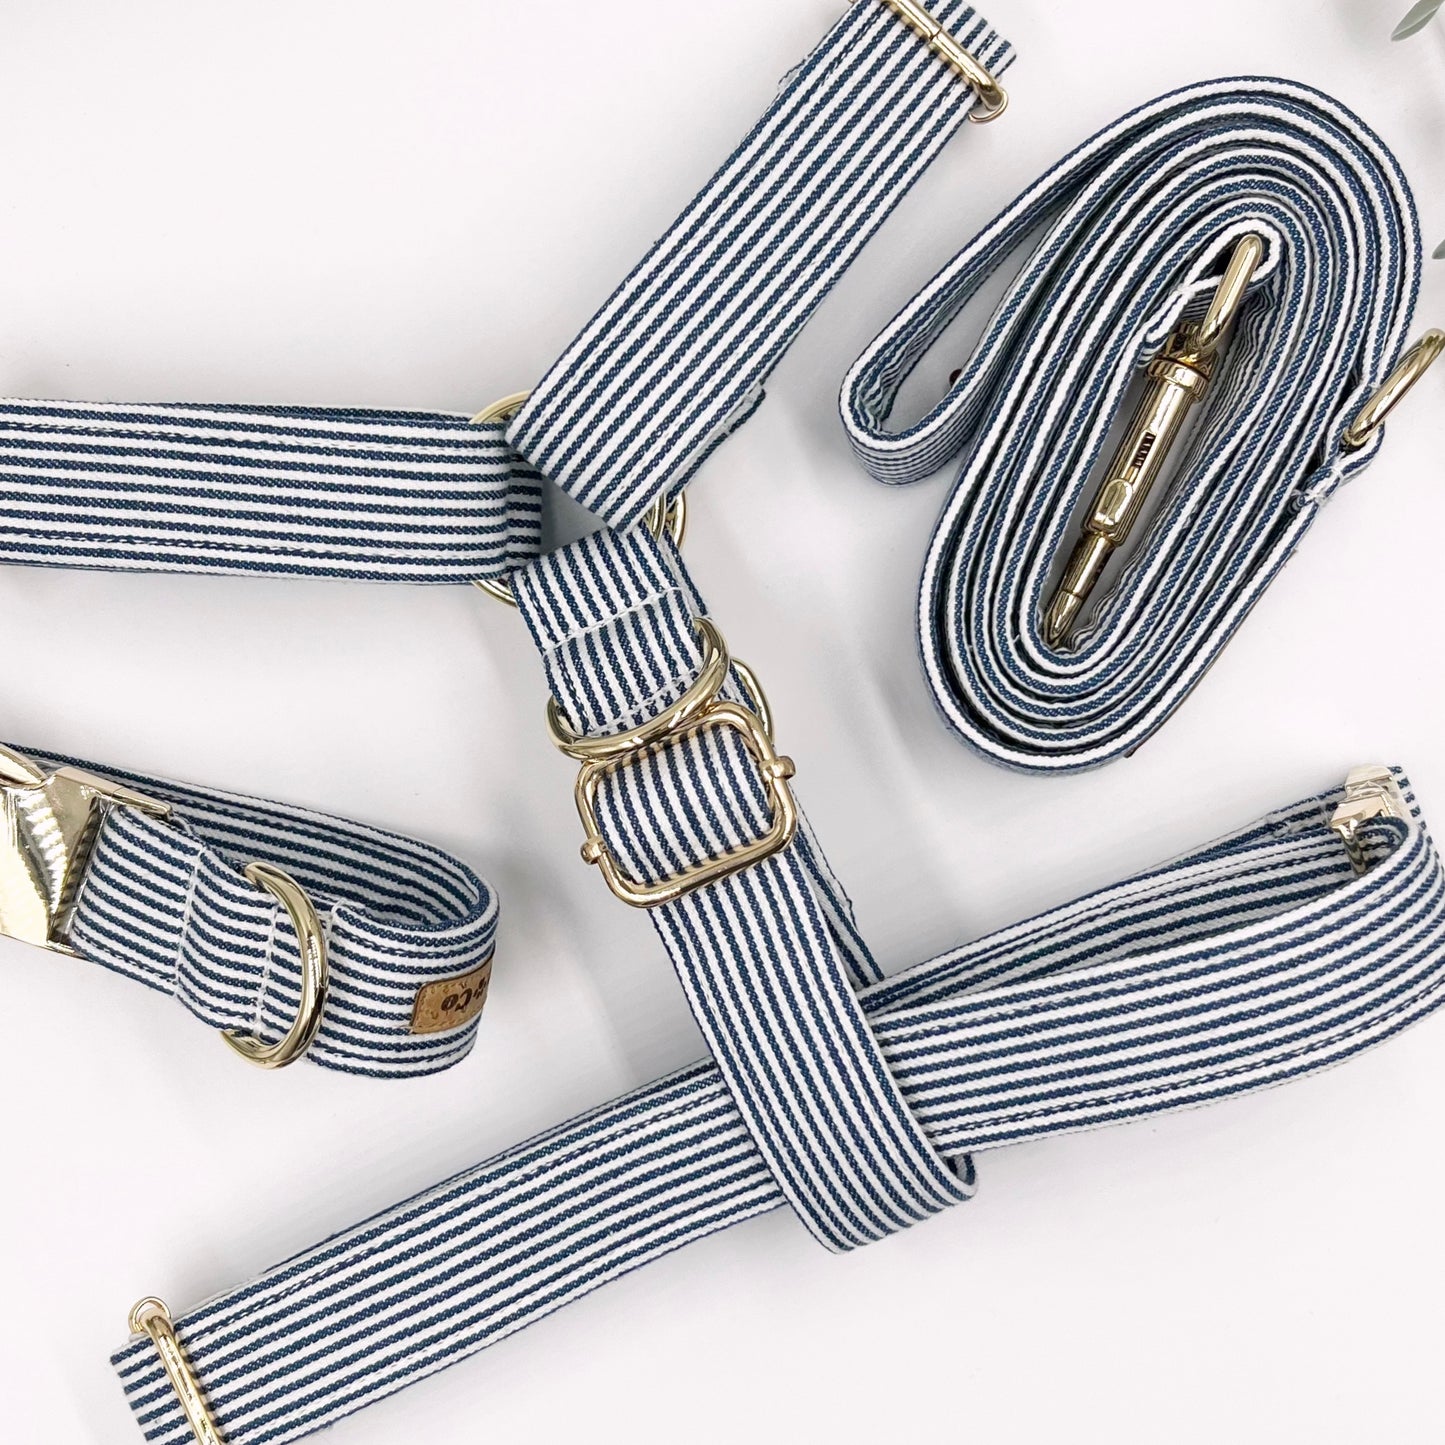 The 'George' Strap Harness